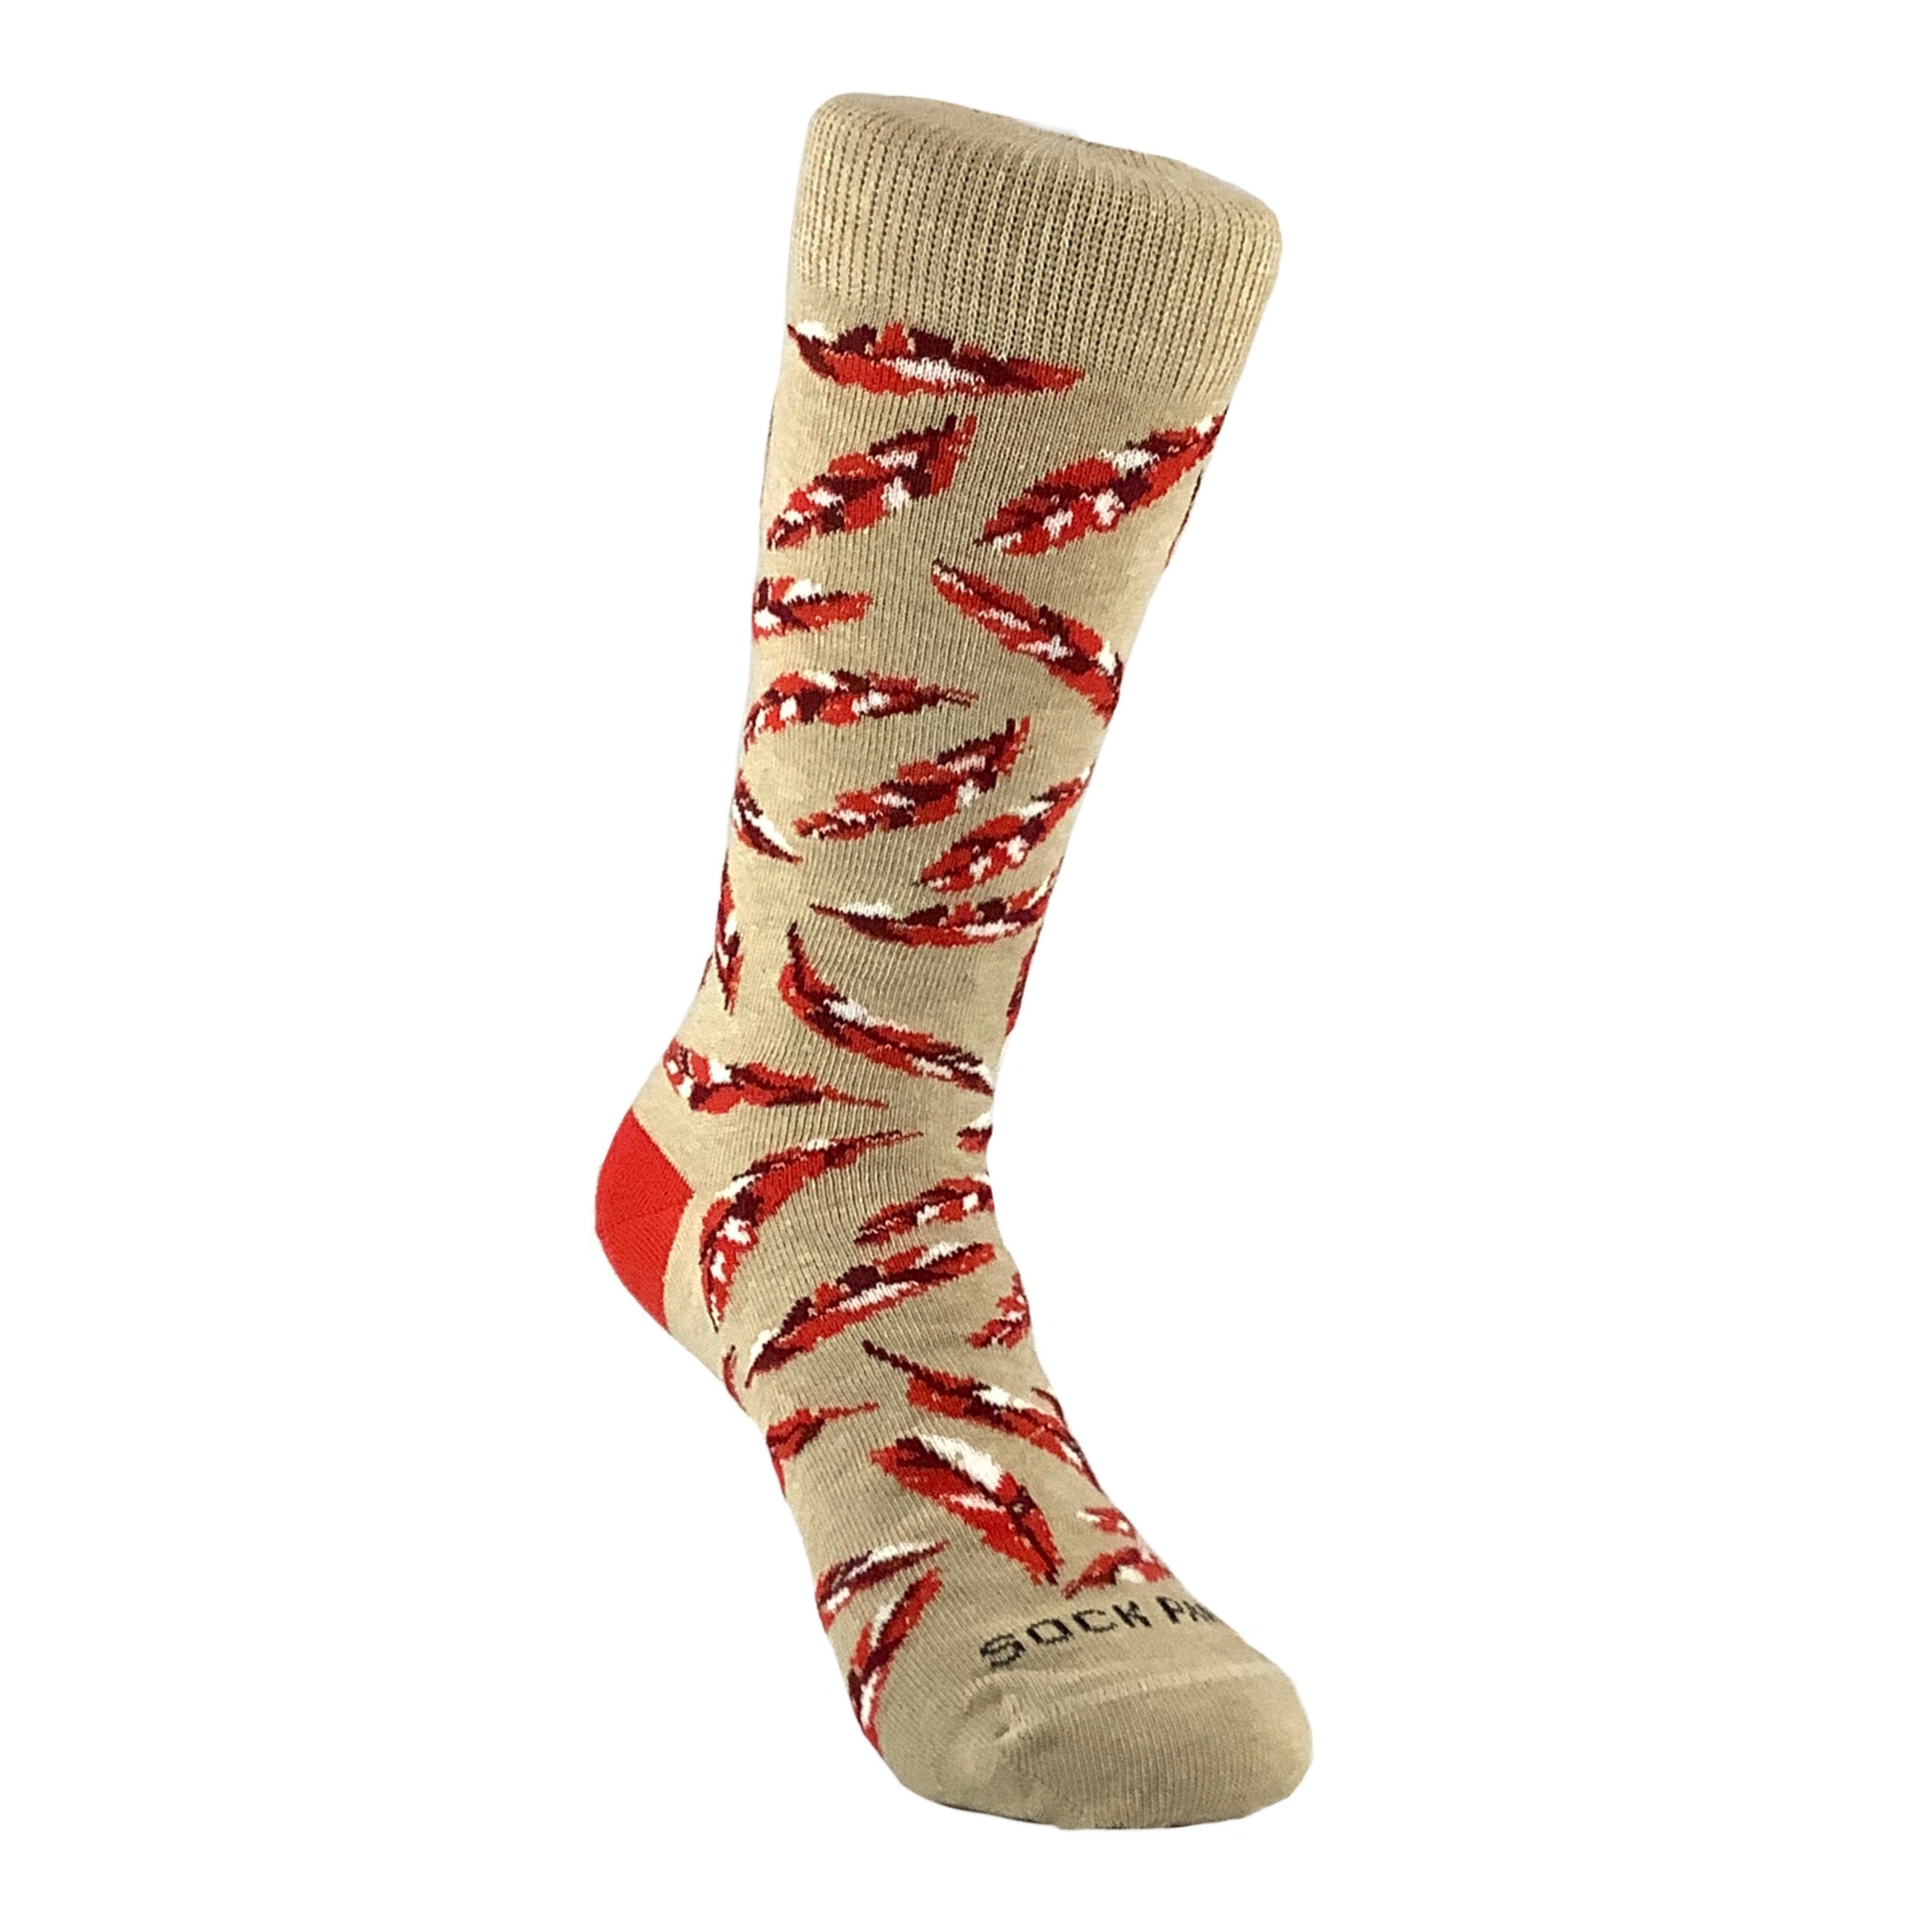 Feather Pattern Socks from the Sock Panda (Adult Small)